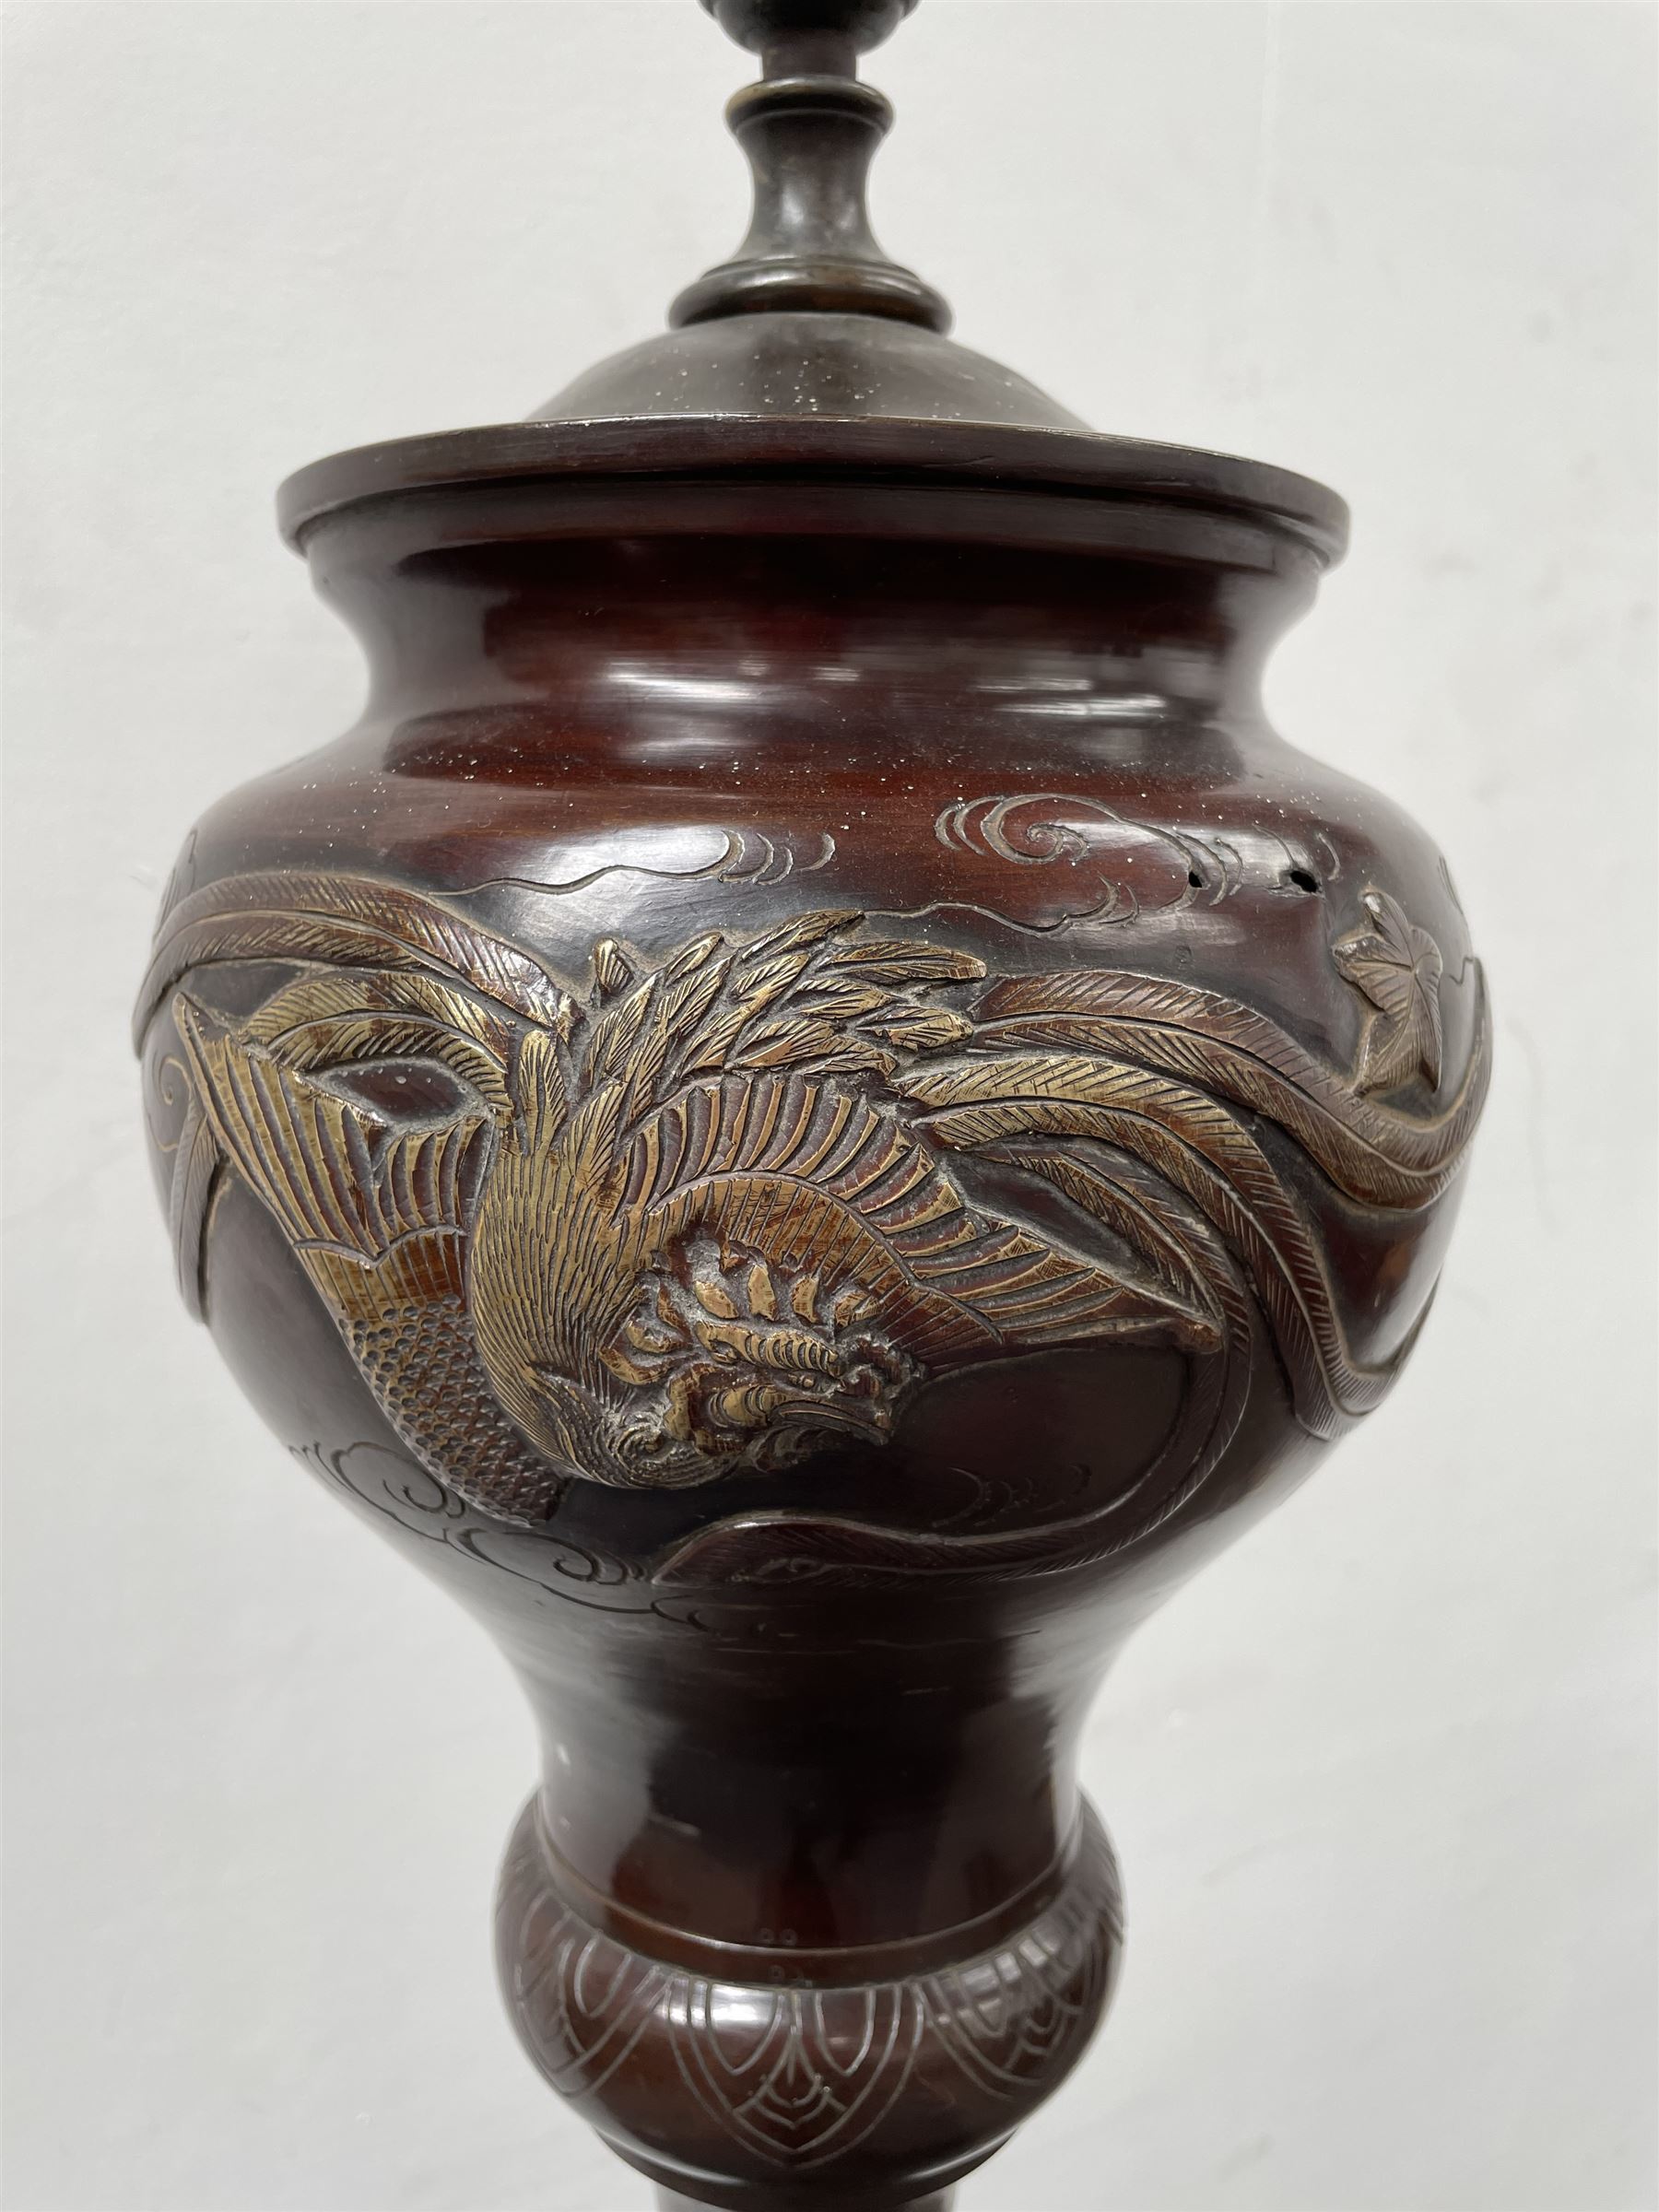 Early 20th century Japanese bronze standard lamp of baluster design decorated with a raised pattern - Image 3 of 3